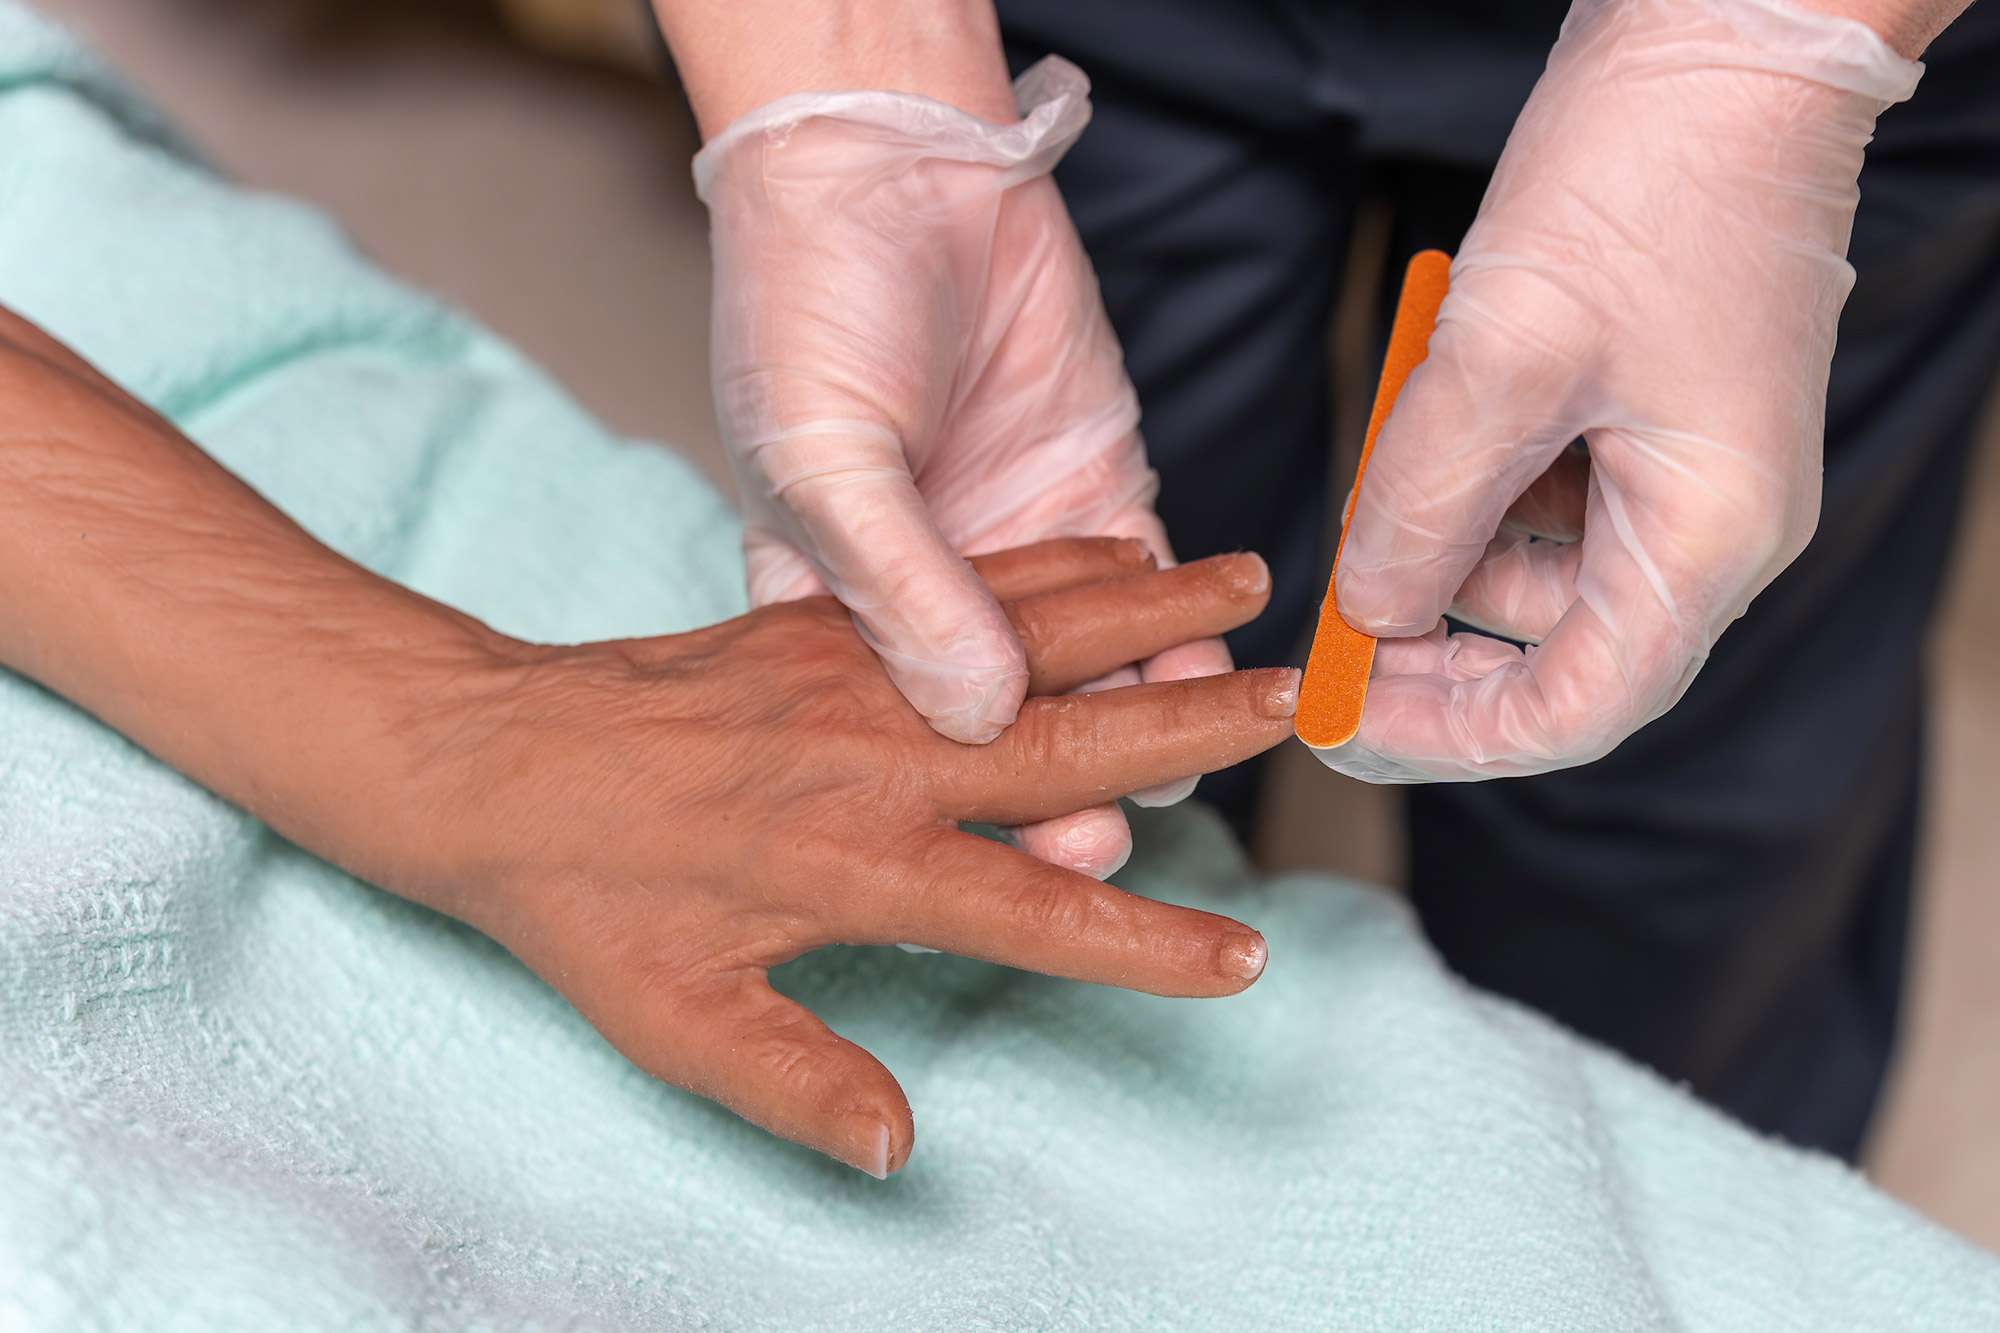 A certified nursing assistant uses a nail filer on the hand of a mannequin.